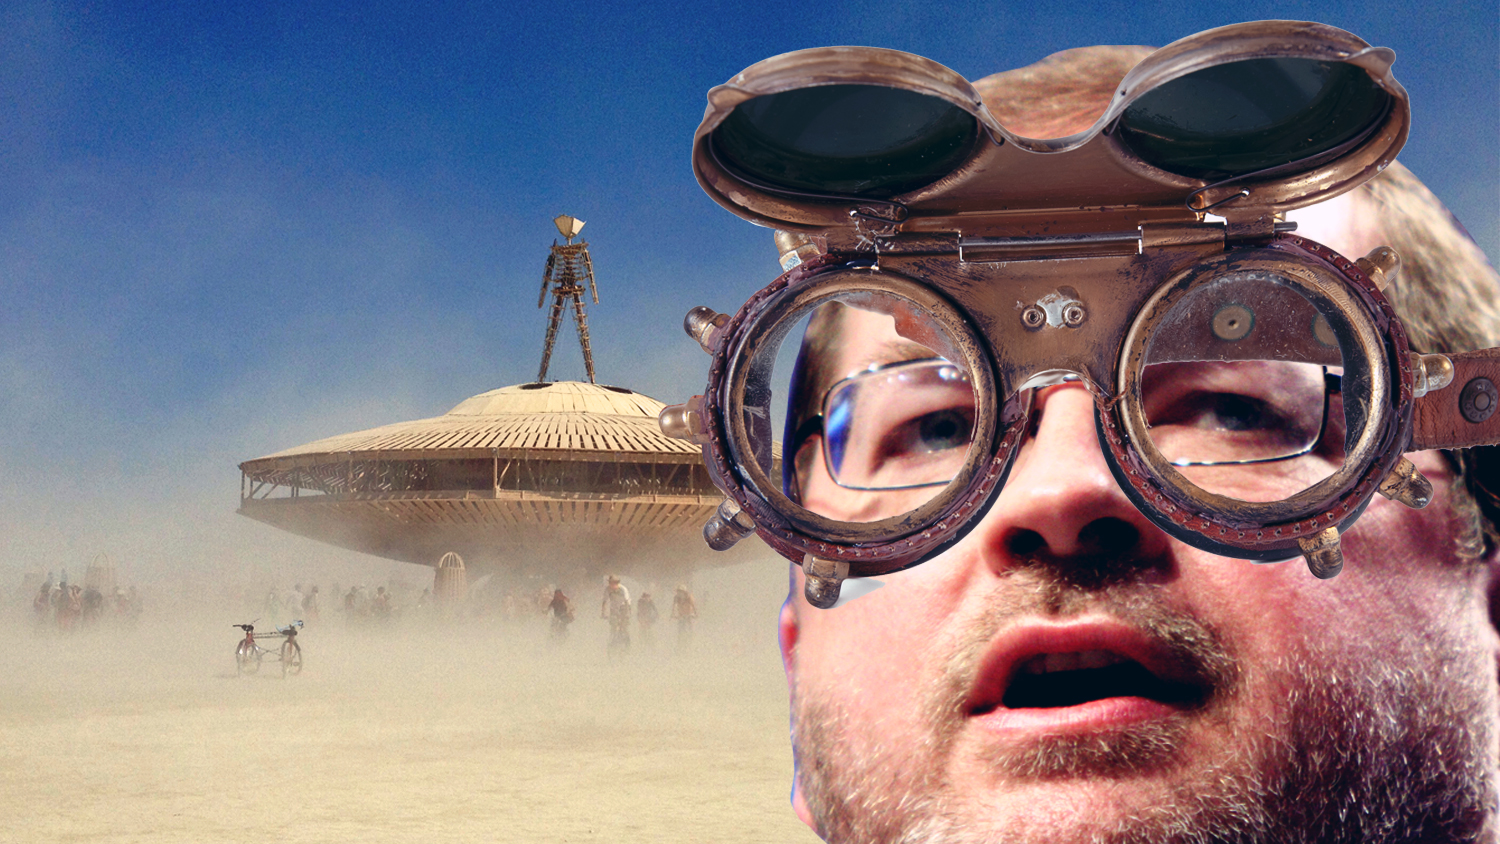 Grover Norquist at Burning Man